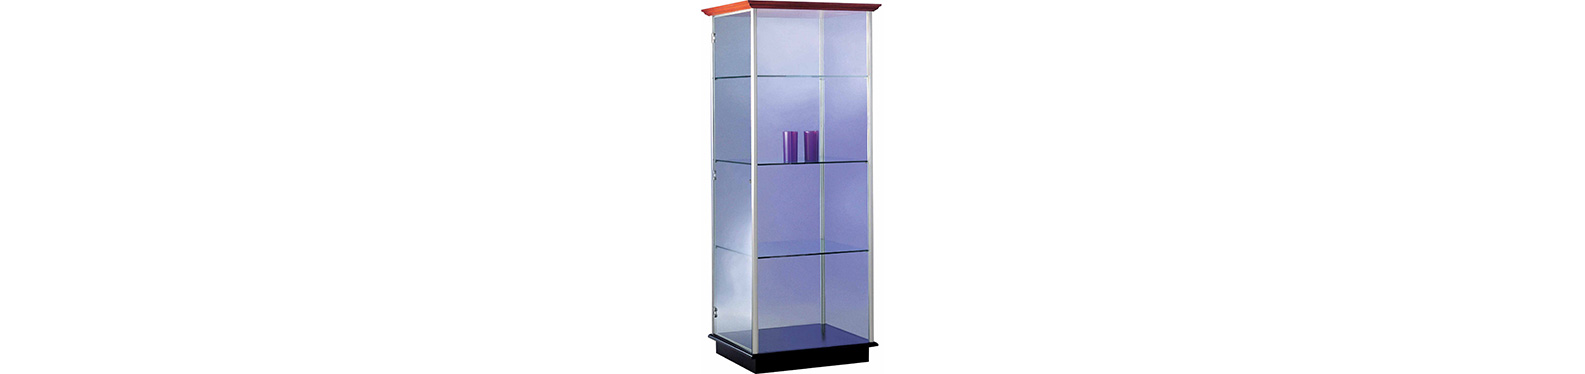 display-case-large-Peter-Pepper-2